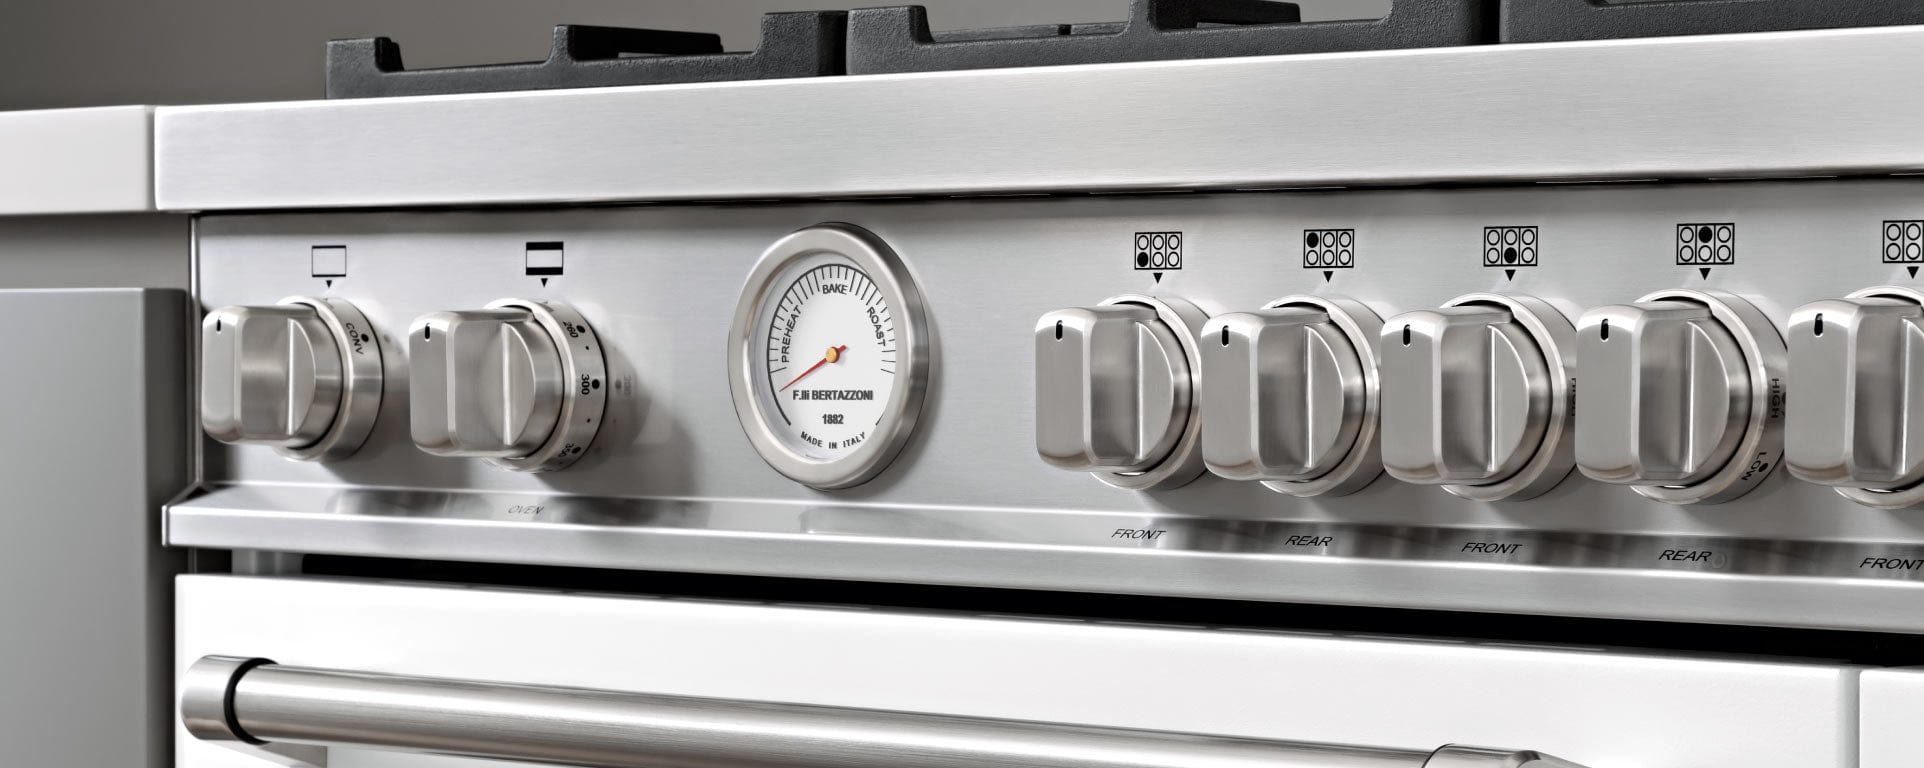 Bertazzoni Master Series 48" 6 Aluminum Burners Bianco Matt Freestanding Propane Gas Range With 7.1 Cu.Ft. Electric Manual Clean Double Oven and Griddle MAS486GDFMBIV + CONVERSION Luxury Appliances Direct